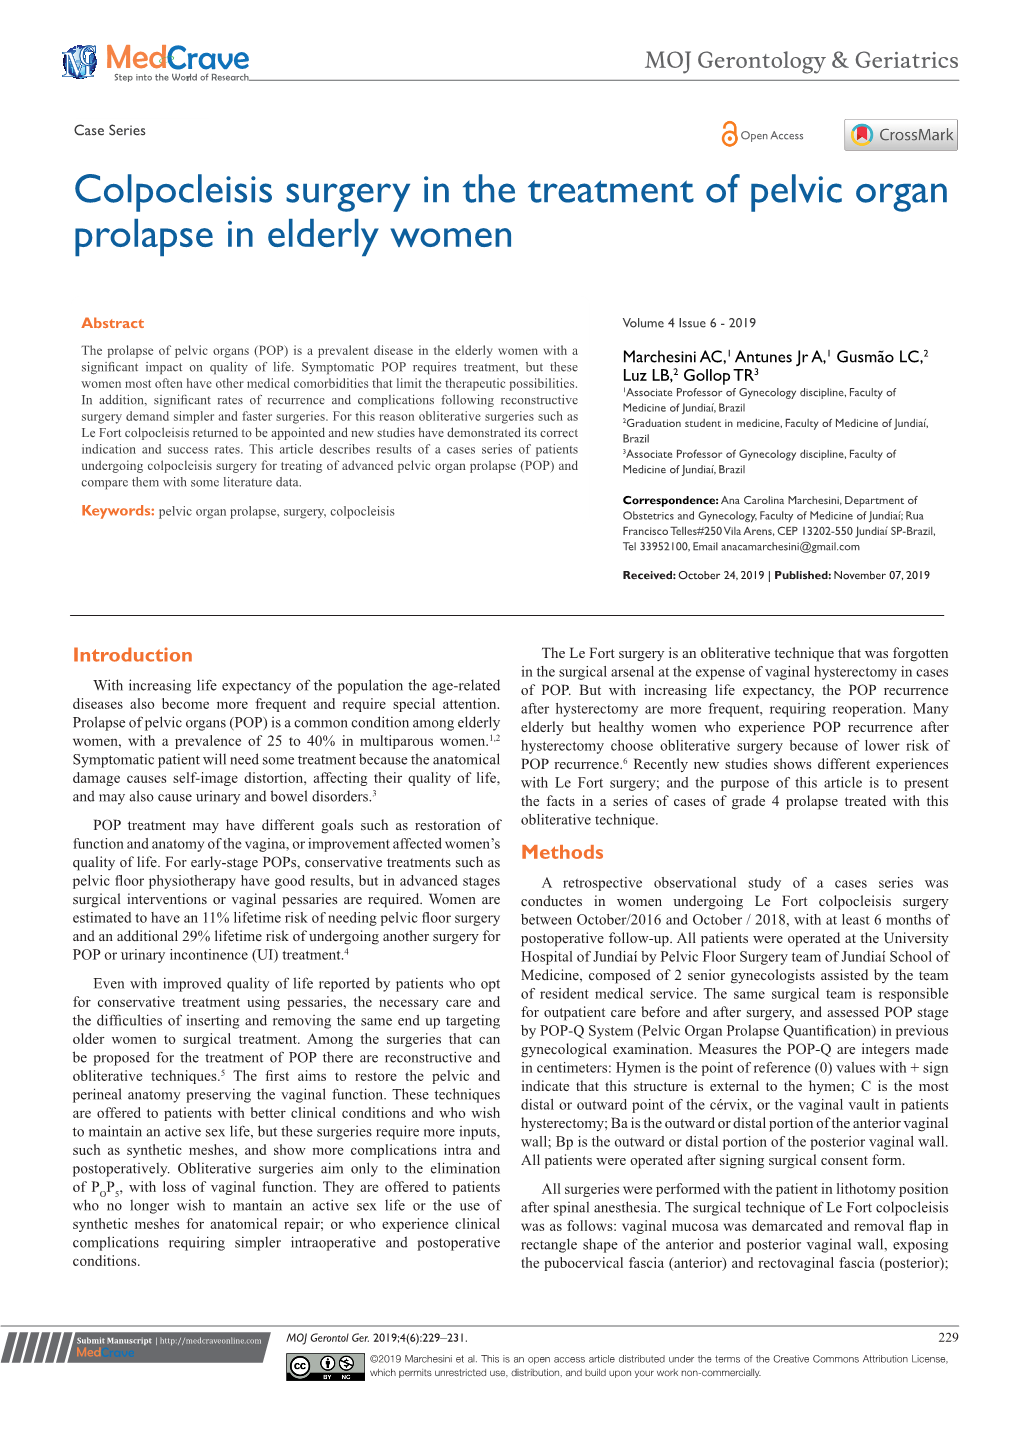 Colpocleisis Surgery in the Treatment of Pelvic Organ Prolapse in Elderly Women